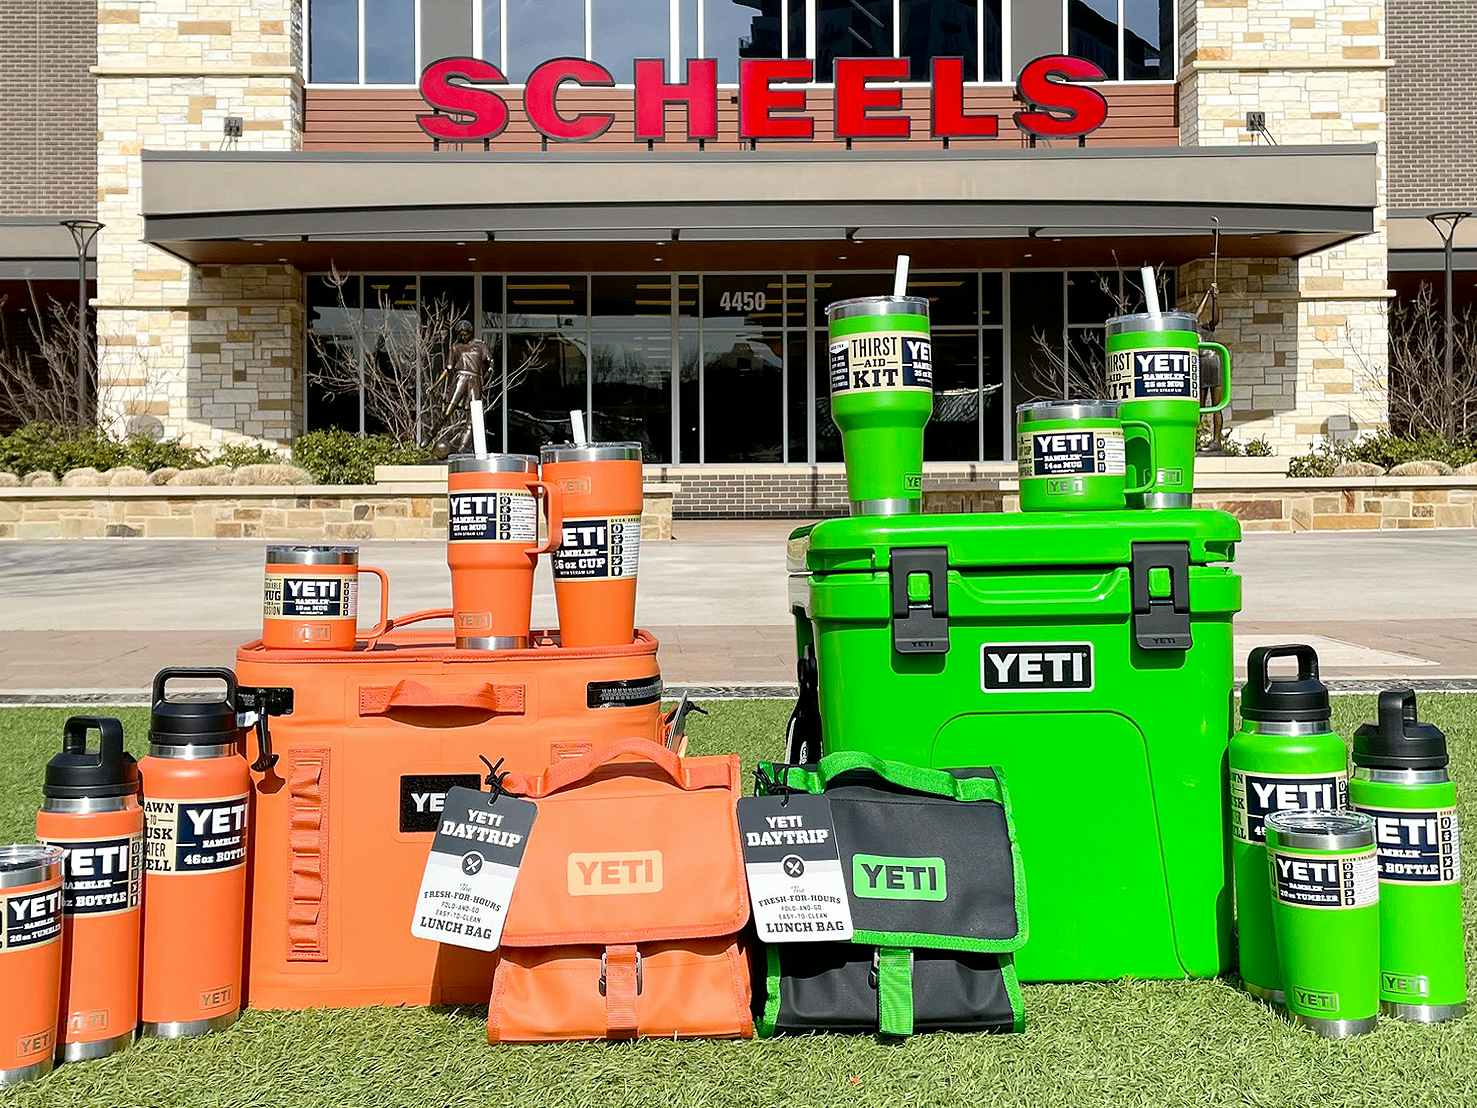 Family picture : r/YetiCoolers